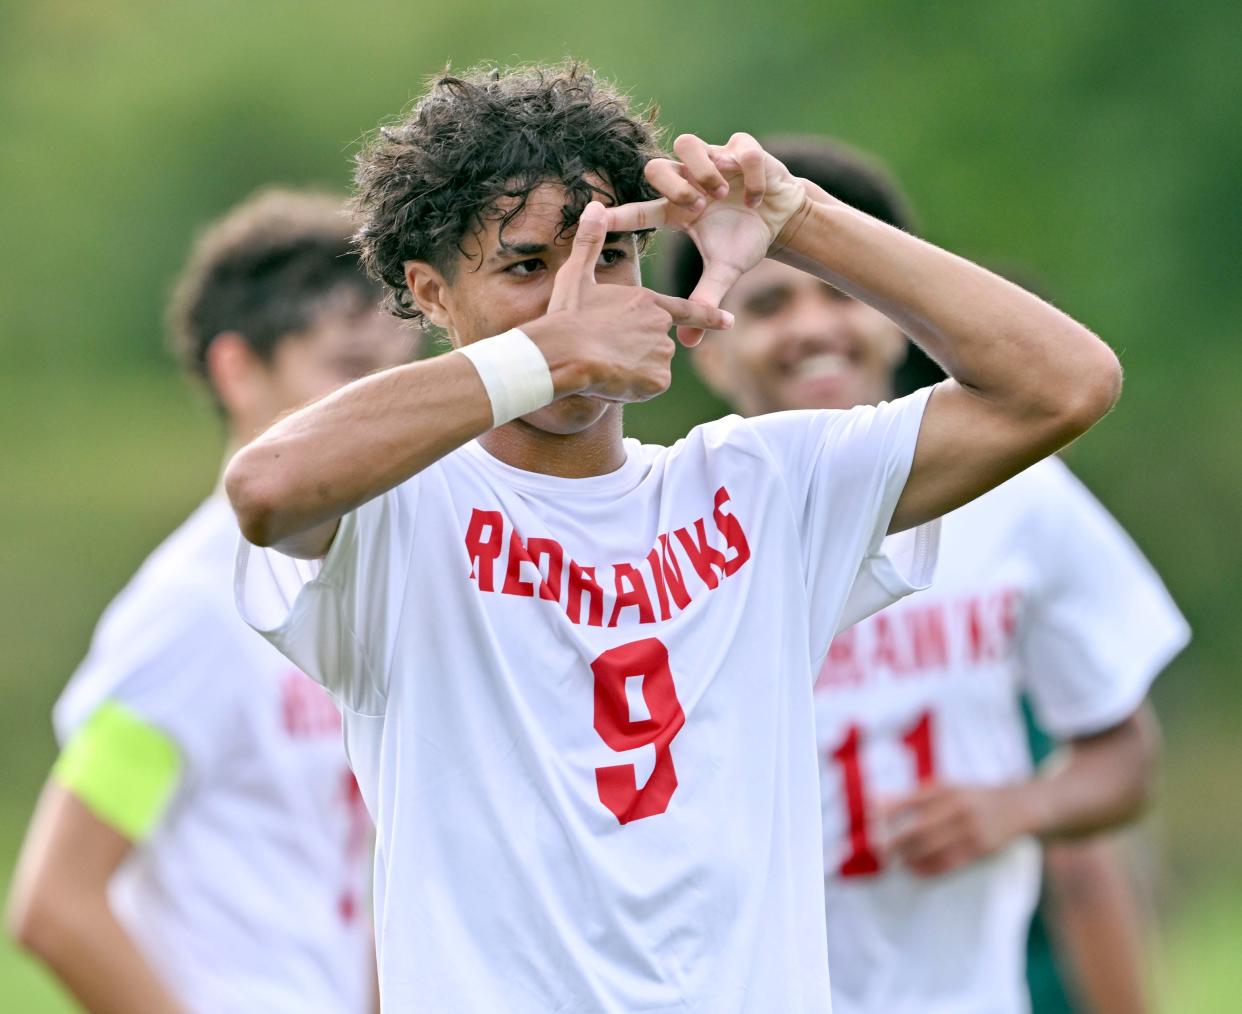 Marcelo Diamantino of Barnstable celebrates after scoring a goal against Sturgis West boys soccer.